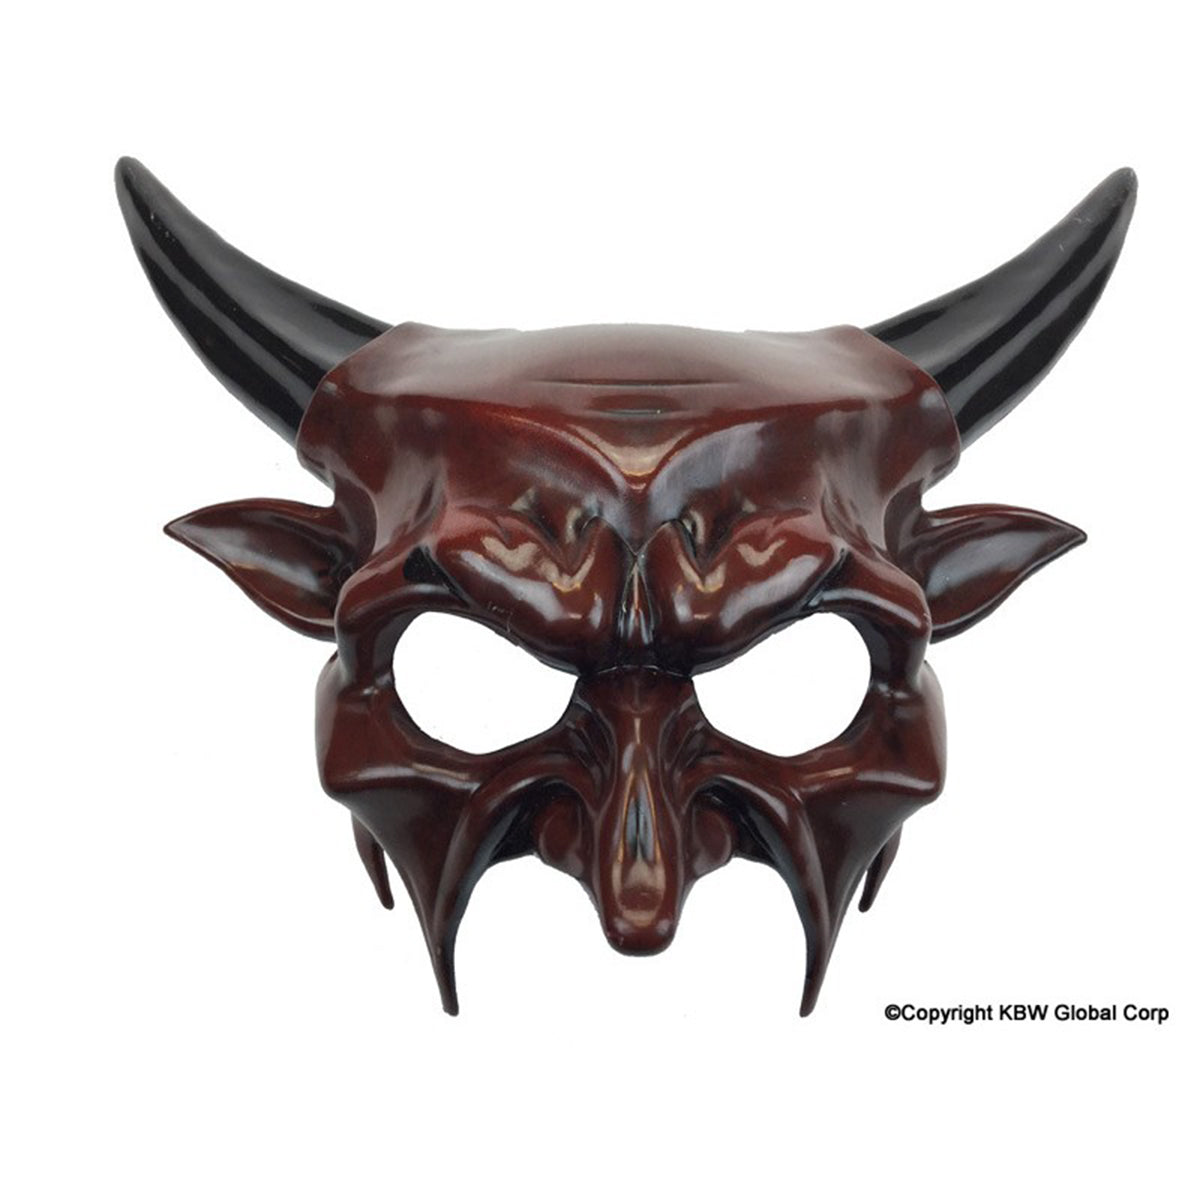 KBW GLOBAL CORP Costume Accessories Demon Mask for Adults 831687012426